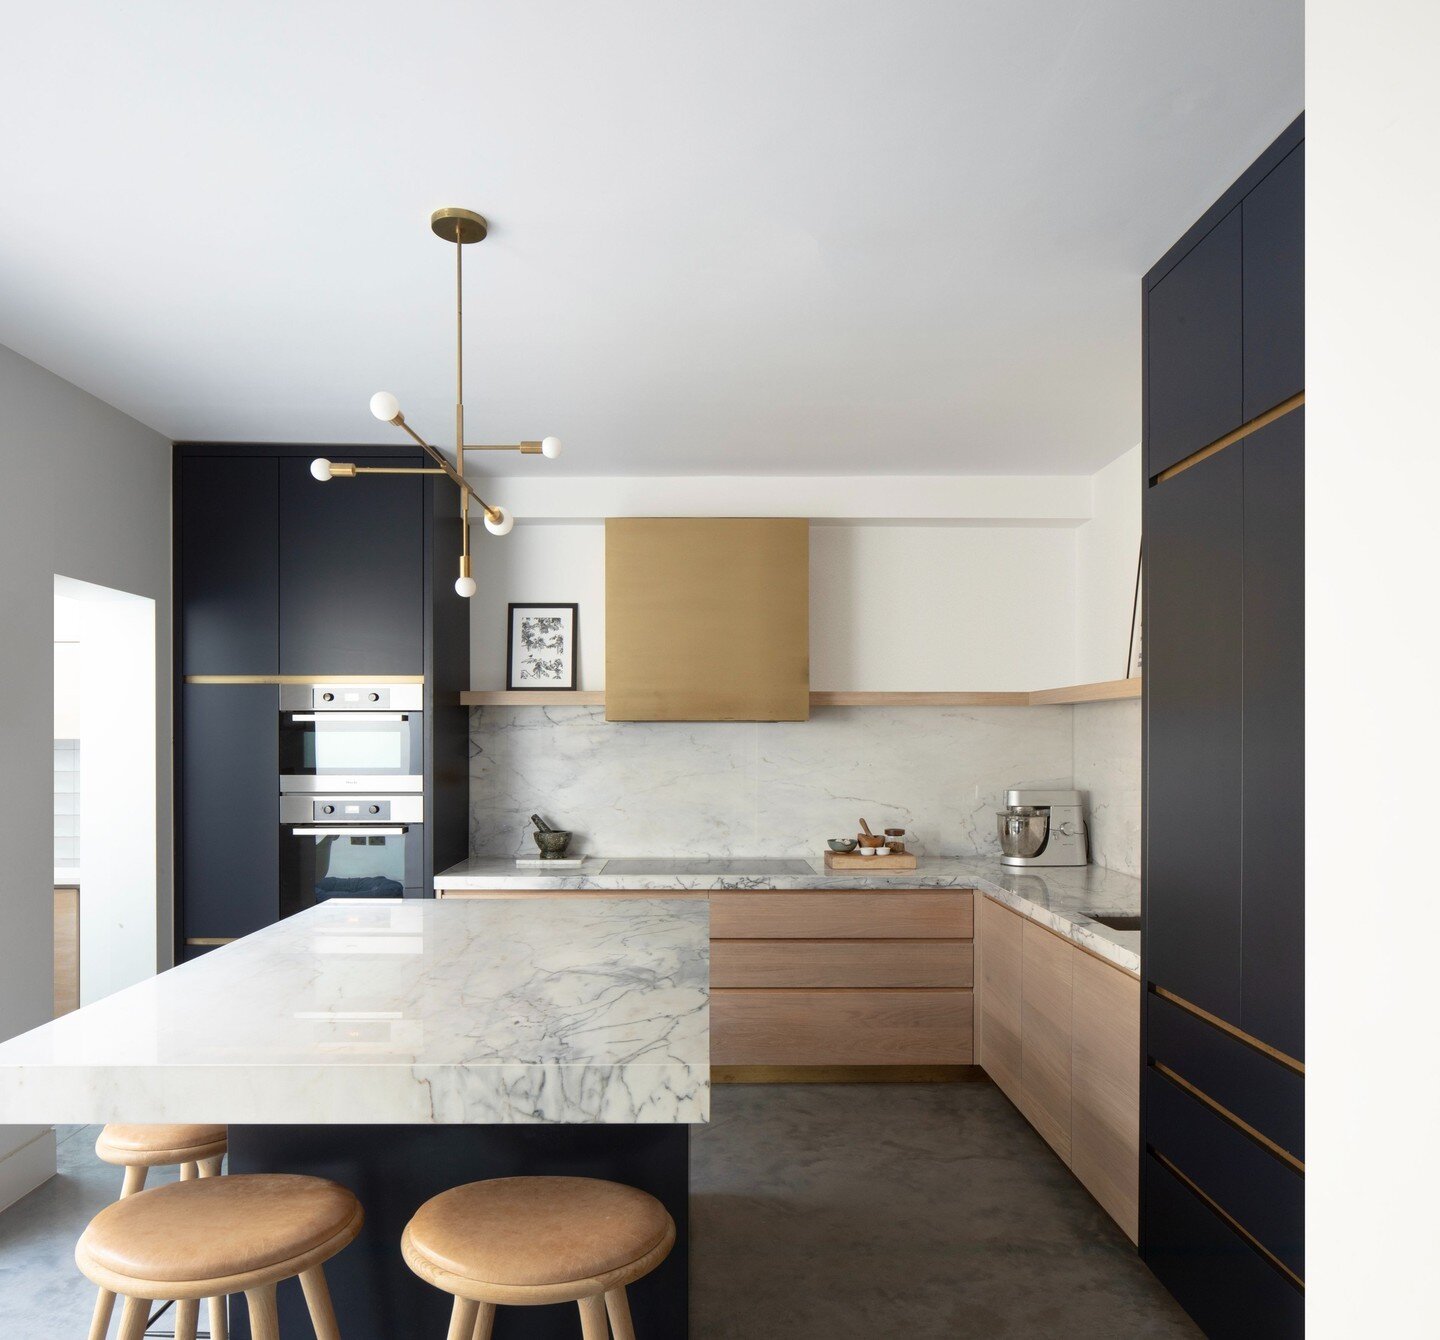 The kitchen at our Herne Hill project is both contemporary and luxurious. Mixing warm brass tones and dark navy with a polished concrete floor and feature marble worktops creates a refined yet inviting interior- a family kitchen perfect for both host